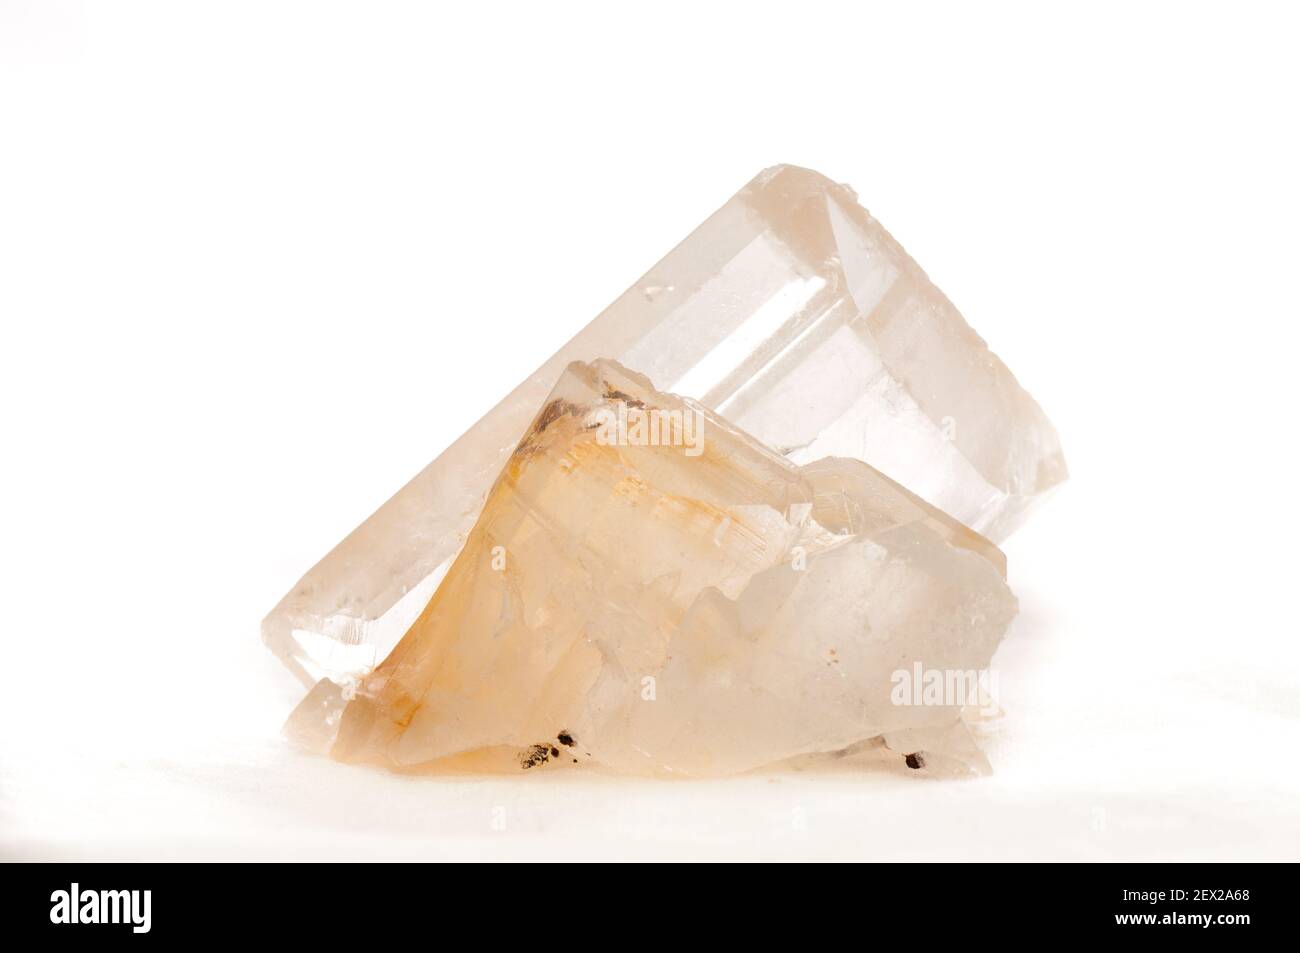 barite rose crystal mineral sample,a rare earth mineral Stock Photo